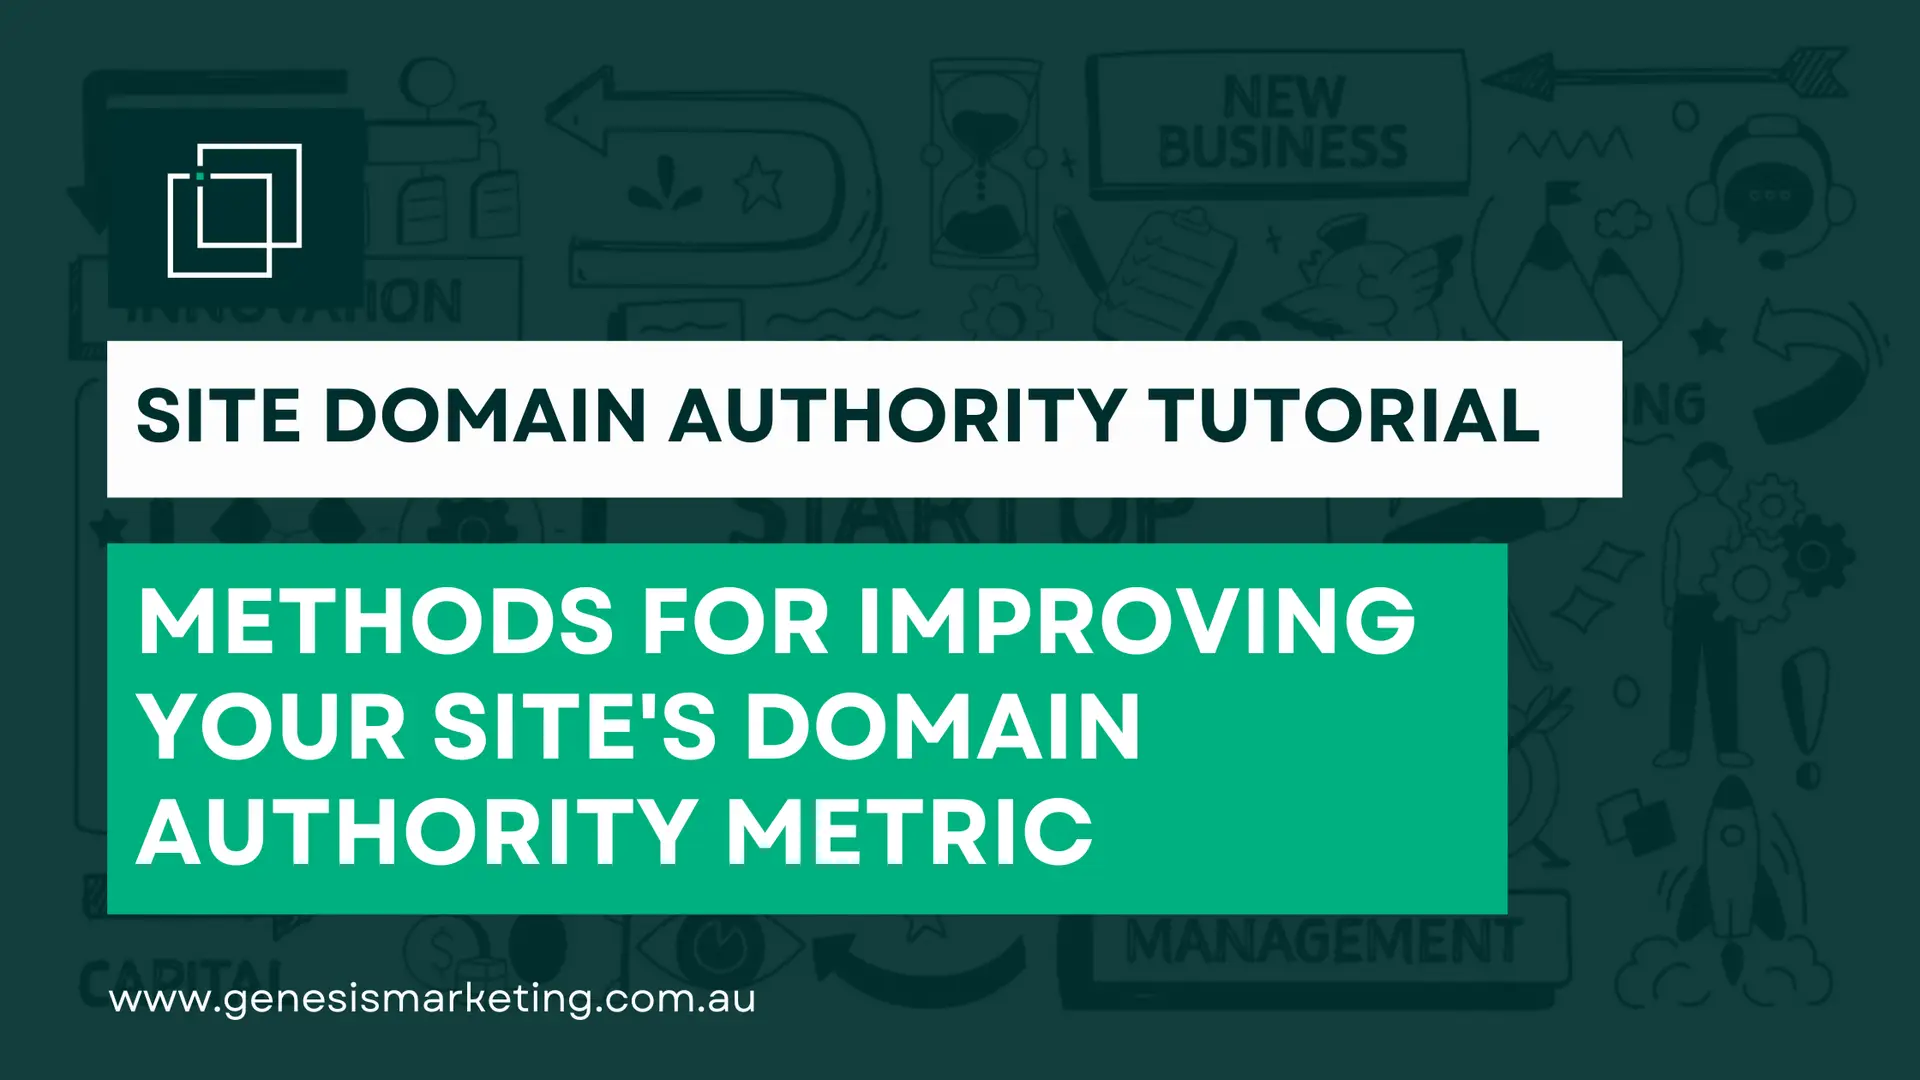 Methods for Improving Your Site's Domain Authority Metric